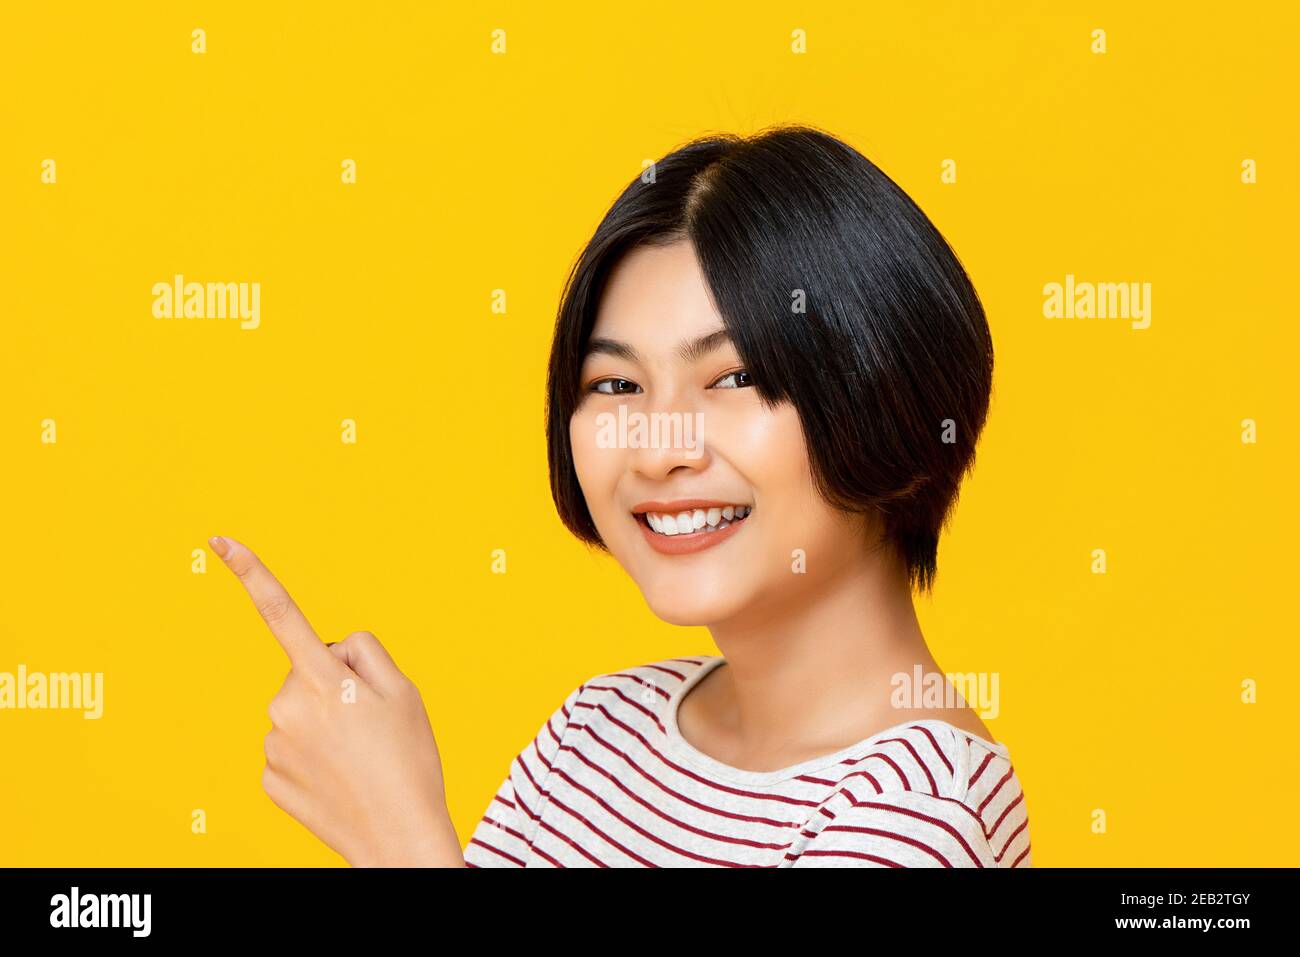 Beautiful smiling young Asian woman with short hairstyle pointing hand to empty space on yellow background Stock Photo